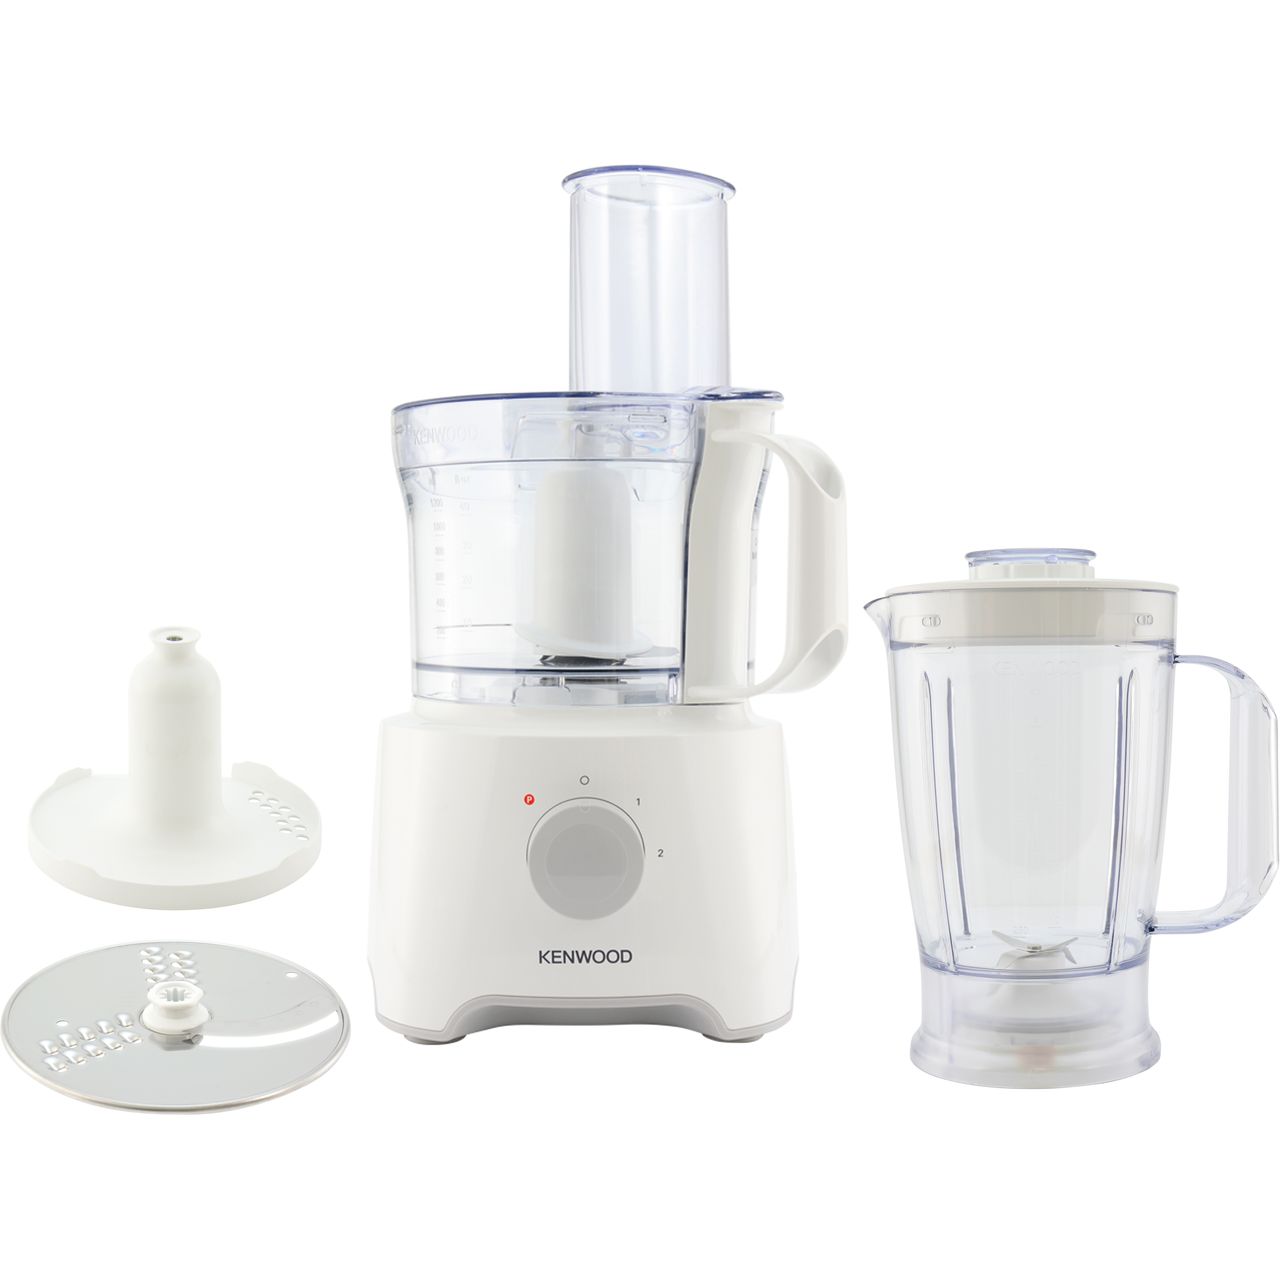 Kenwood MultiPro Compact FDP301WH 2.1 Litre Food Processor Review